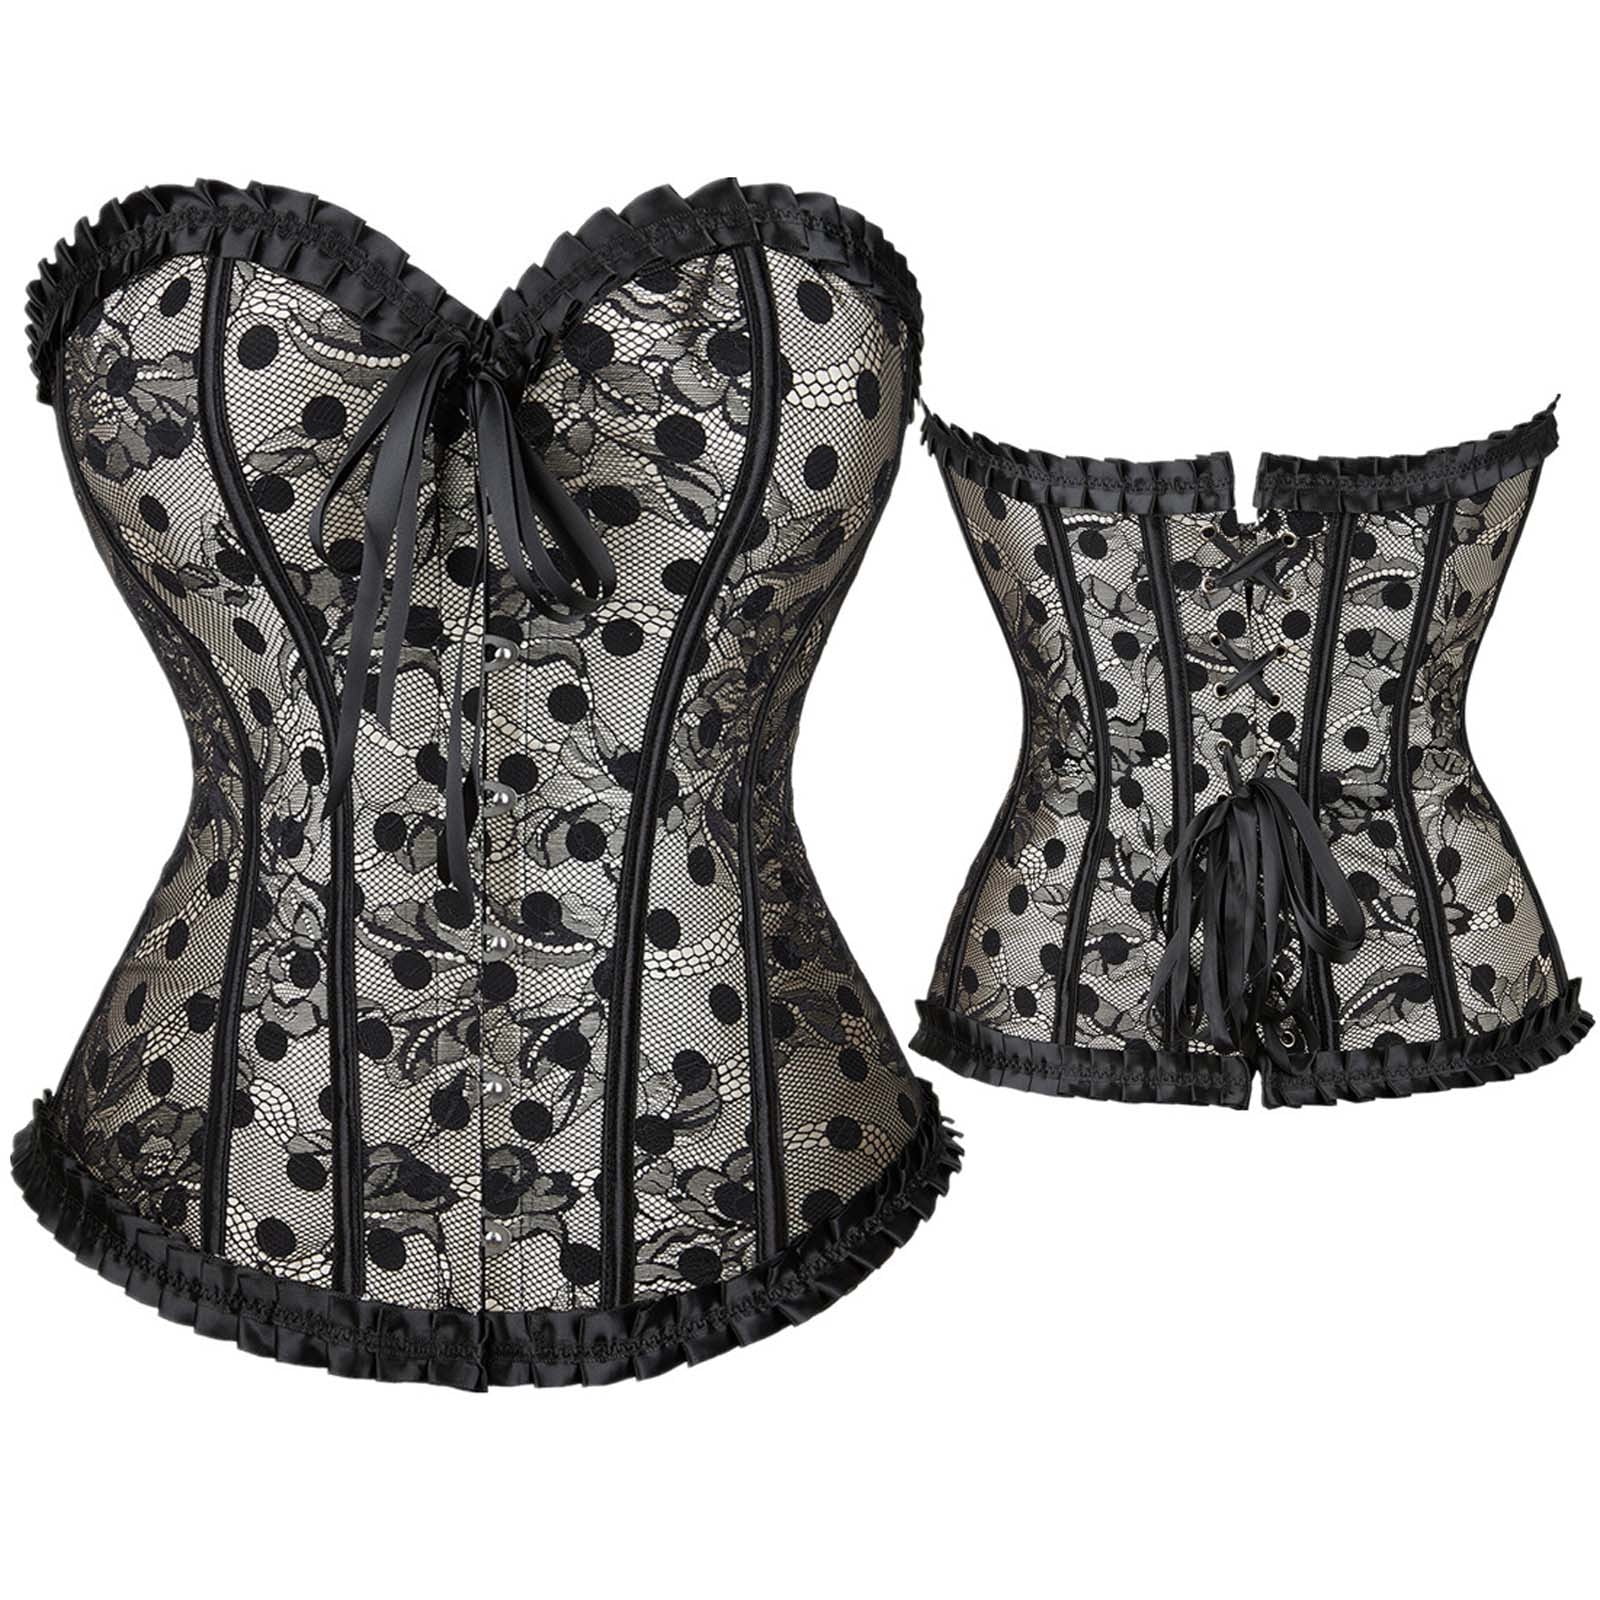 FAKKDUK Corset Tops, Bustier Tops for Women with Spaghetti Straps, Sexy  Boned Top, Plus Size Corsets For Women Bustier Lingerie For Halloween  Costume